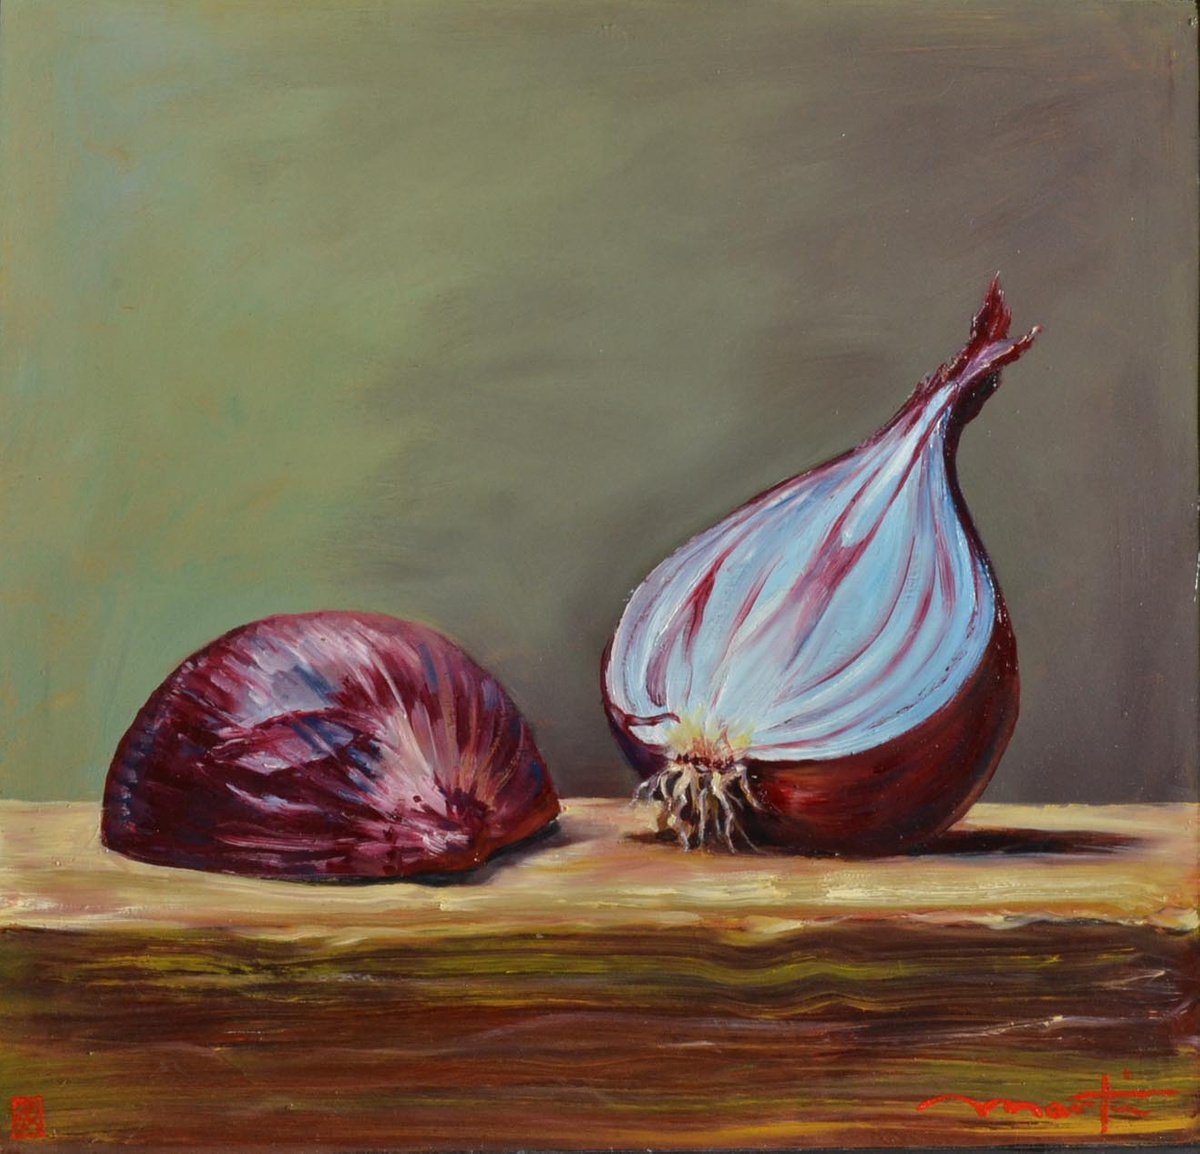 Red Onion by PAUL MARTIN